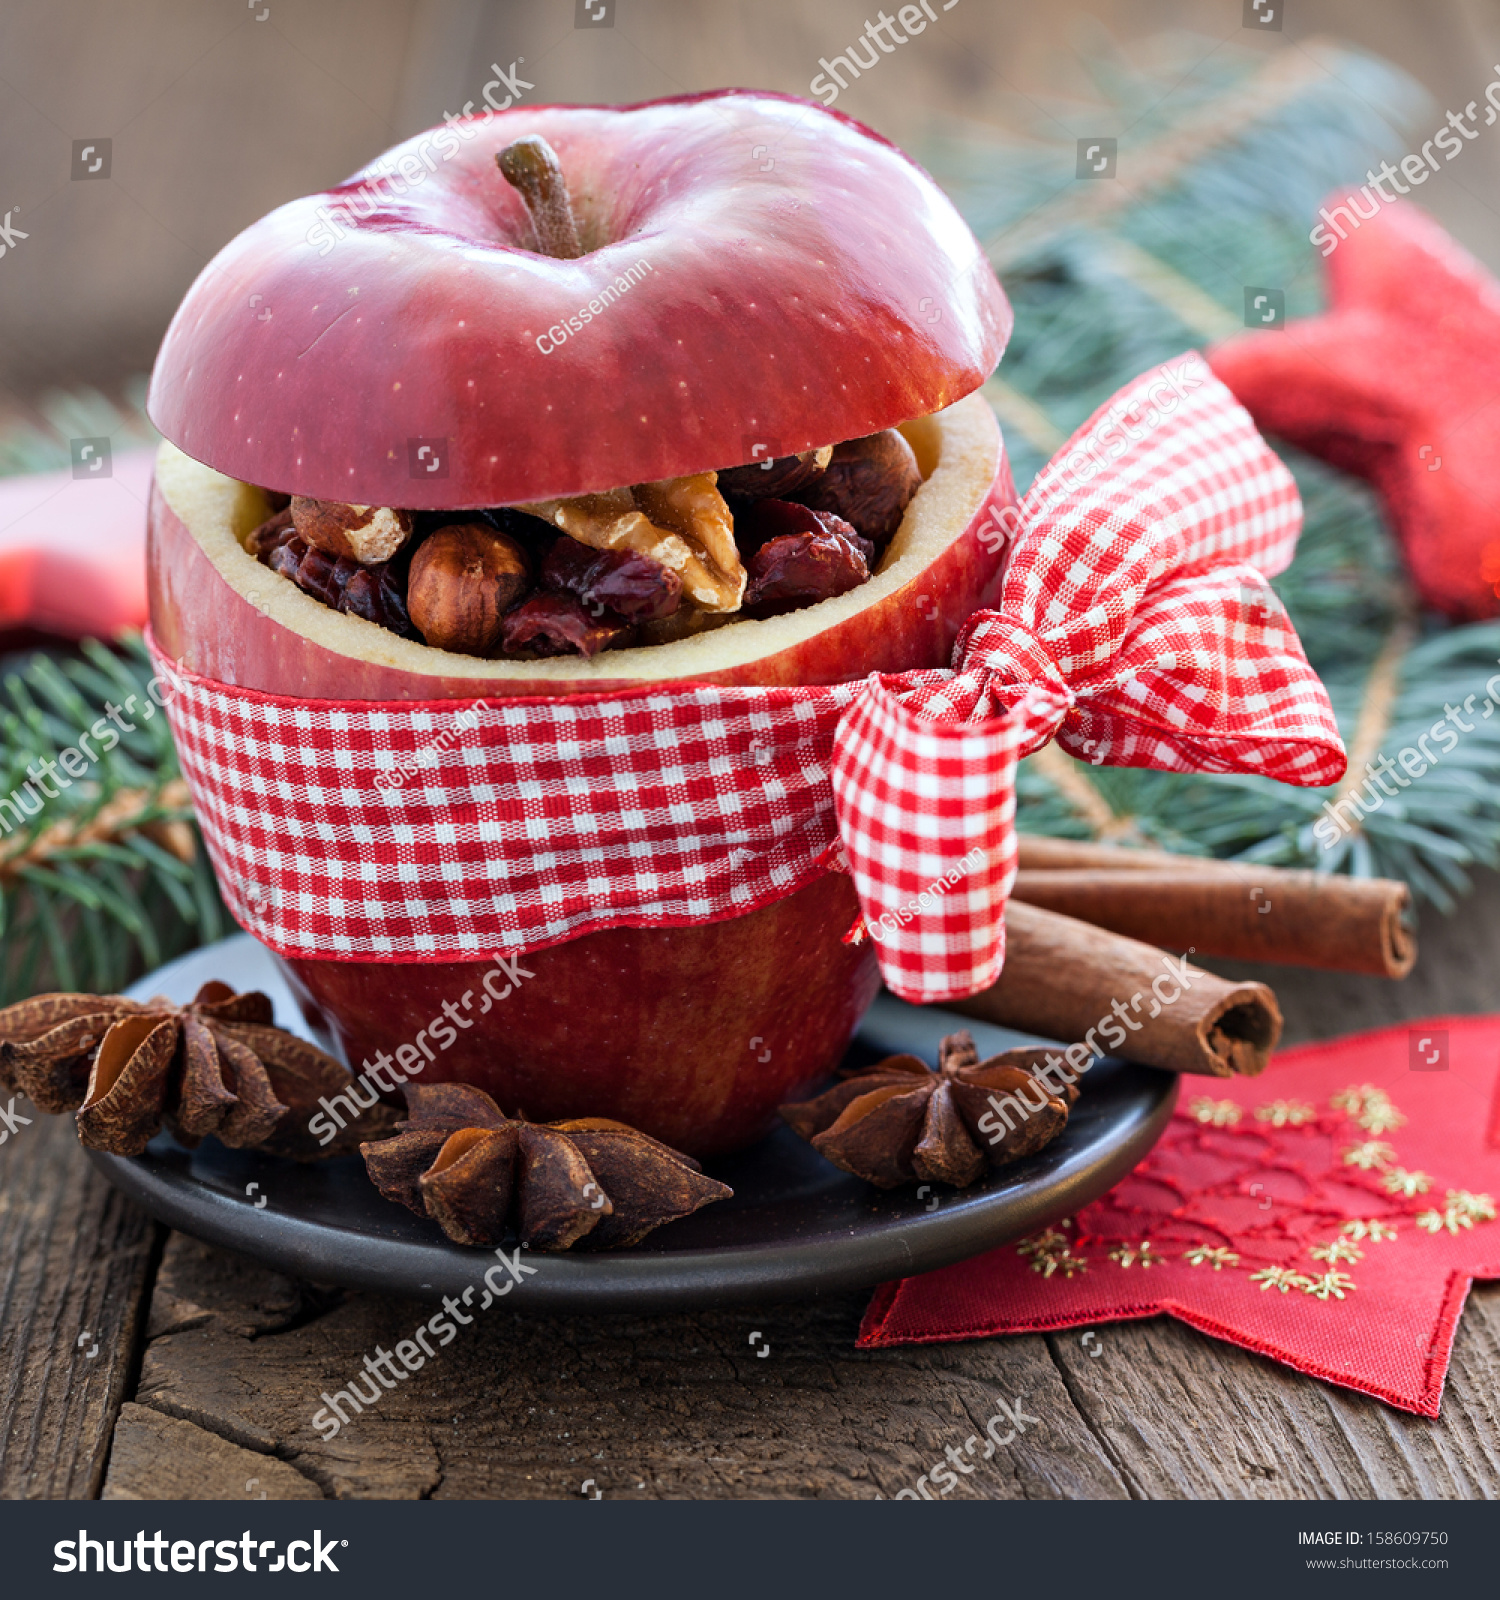 apple with bow and filling   #158609750